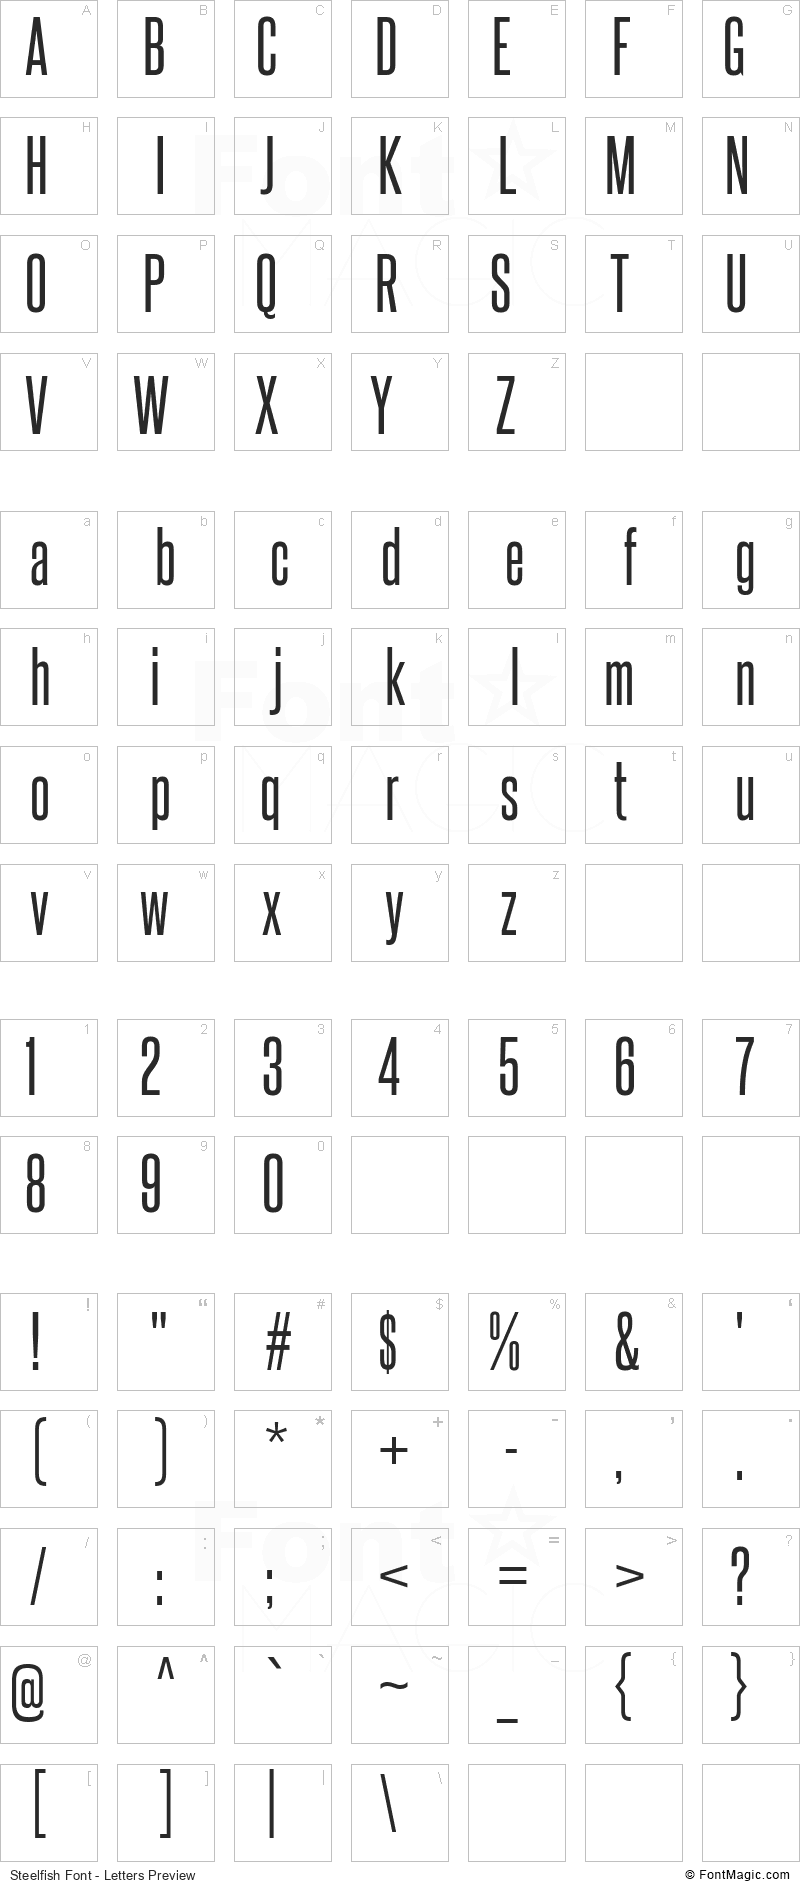 Steelfish Font - All Latters Preview Chart